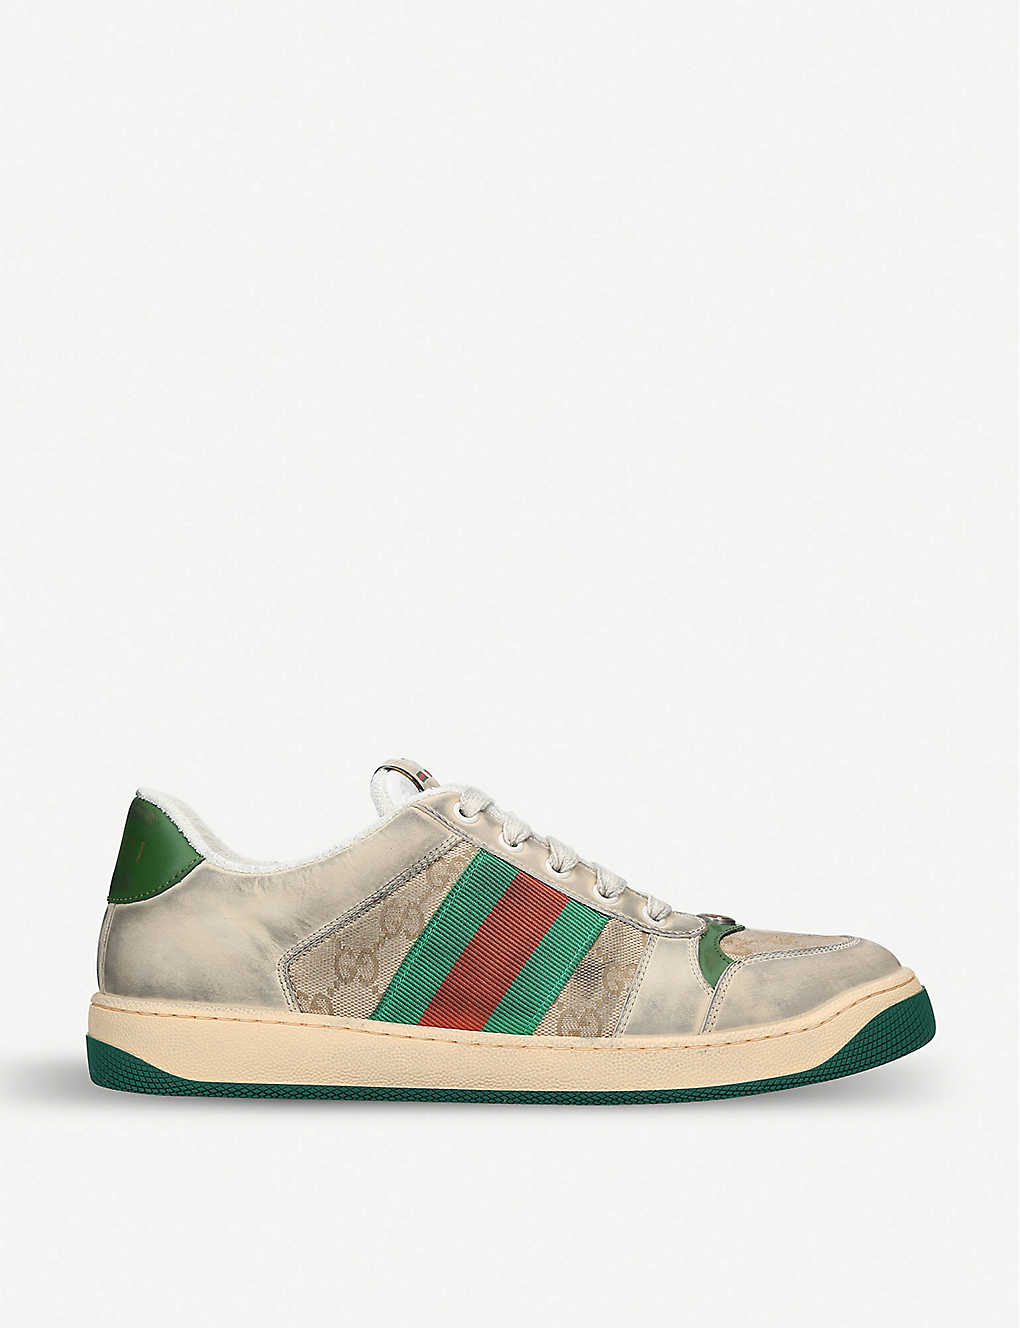 Shop Gucci Men's White/comb Virtus Gg Distressed Leather And Textile Trainers